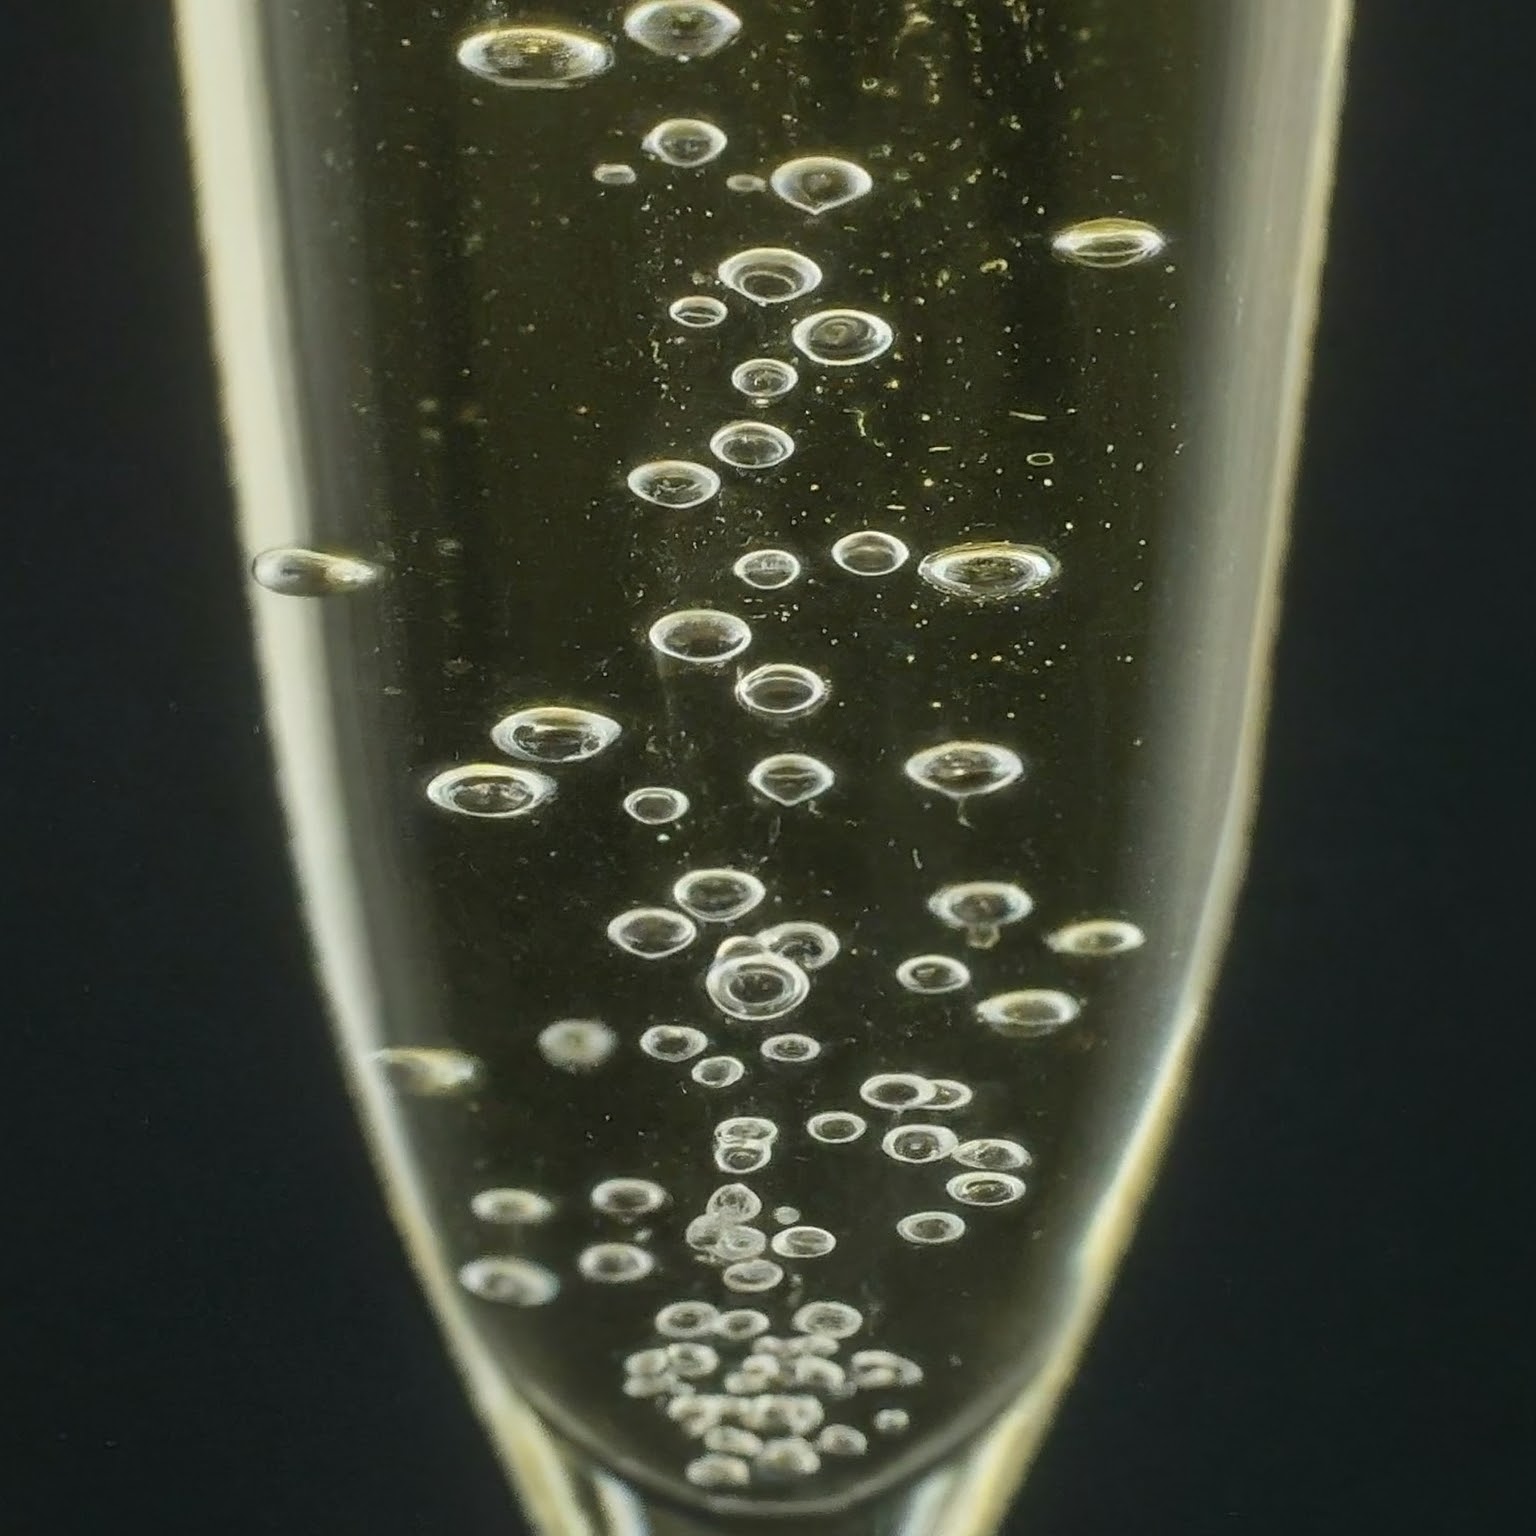 The Secret Behind Champagne's Fizz: It's Not All CO2!